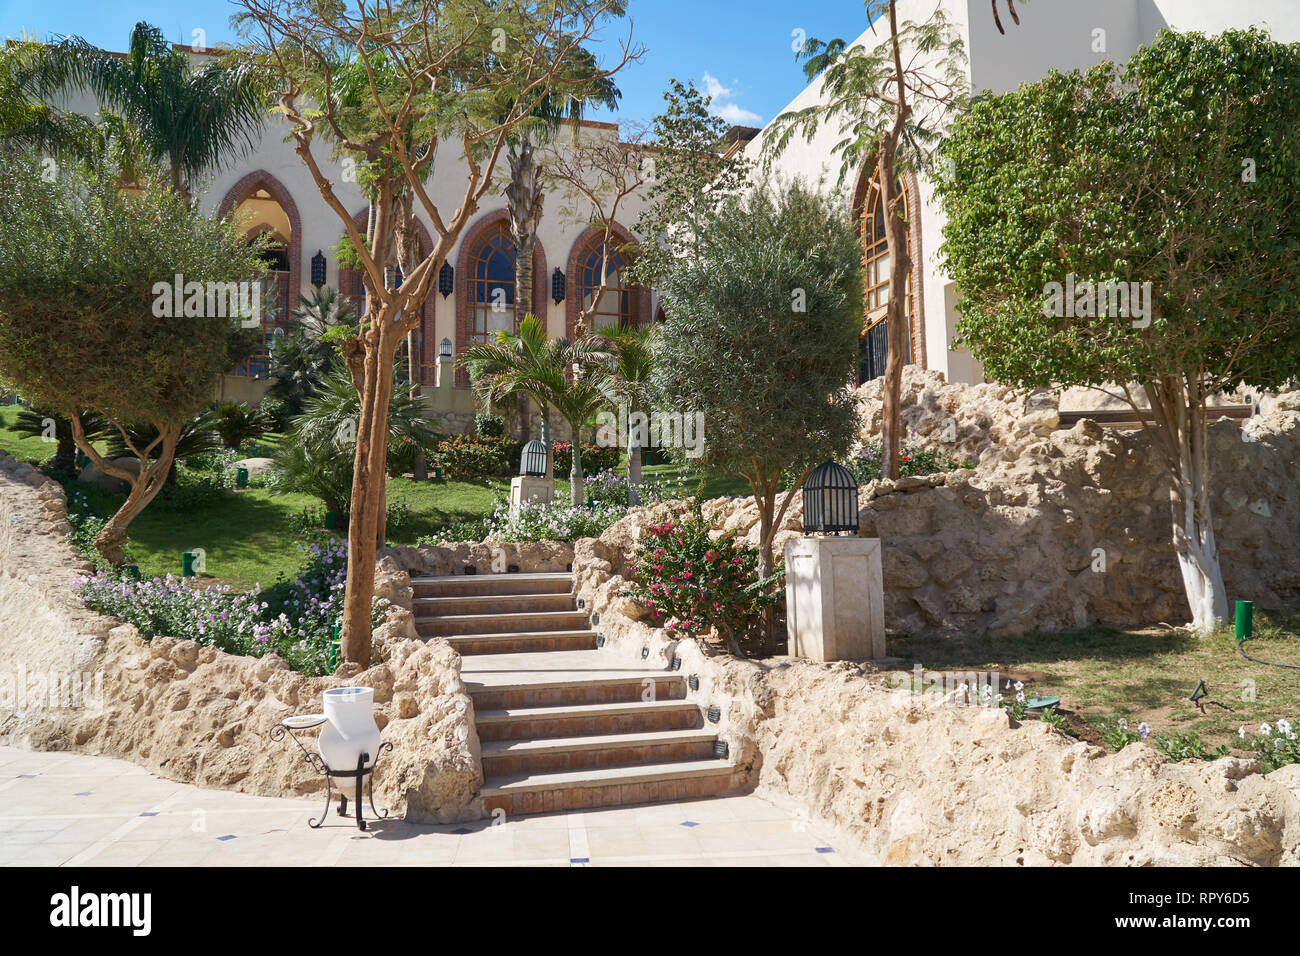 Sharm El Sheikh, Egypt - February 9, 2019: Five-star The Grand Hotel with palms Footpath between green grass in territory in summer Stock Photo